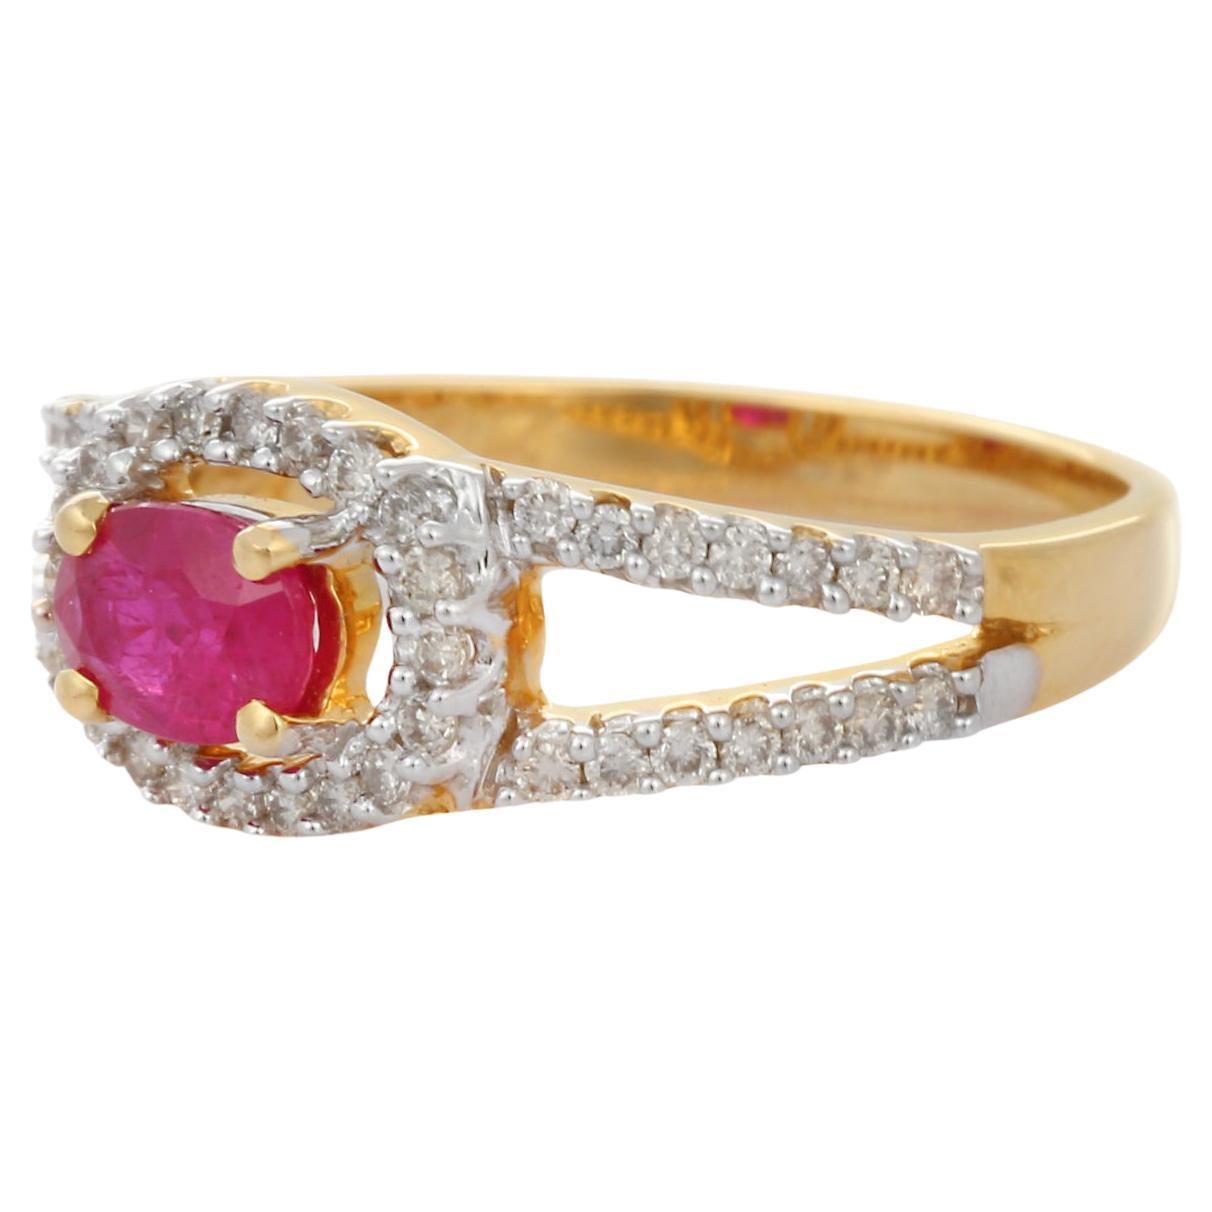 For Sale:  18K Yellow Gold Center Oval Cut Ruby Wedding Ring with Halo of Diamonds 6